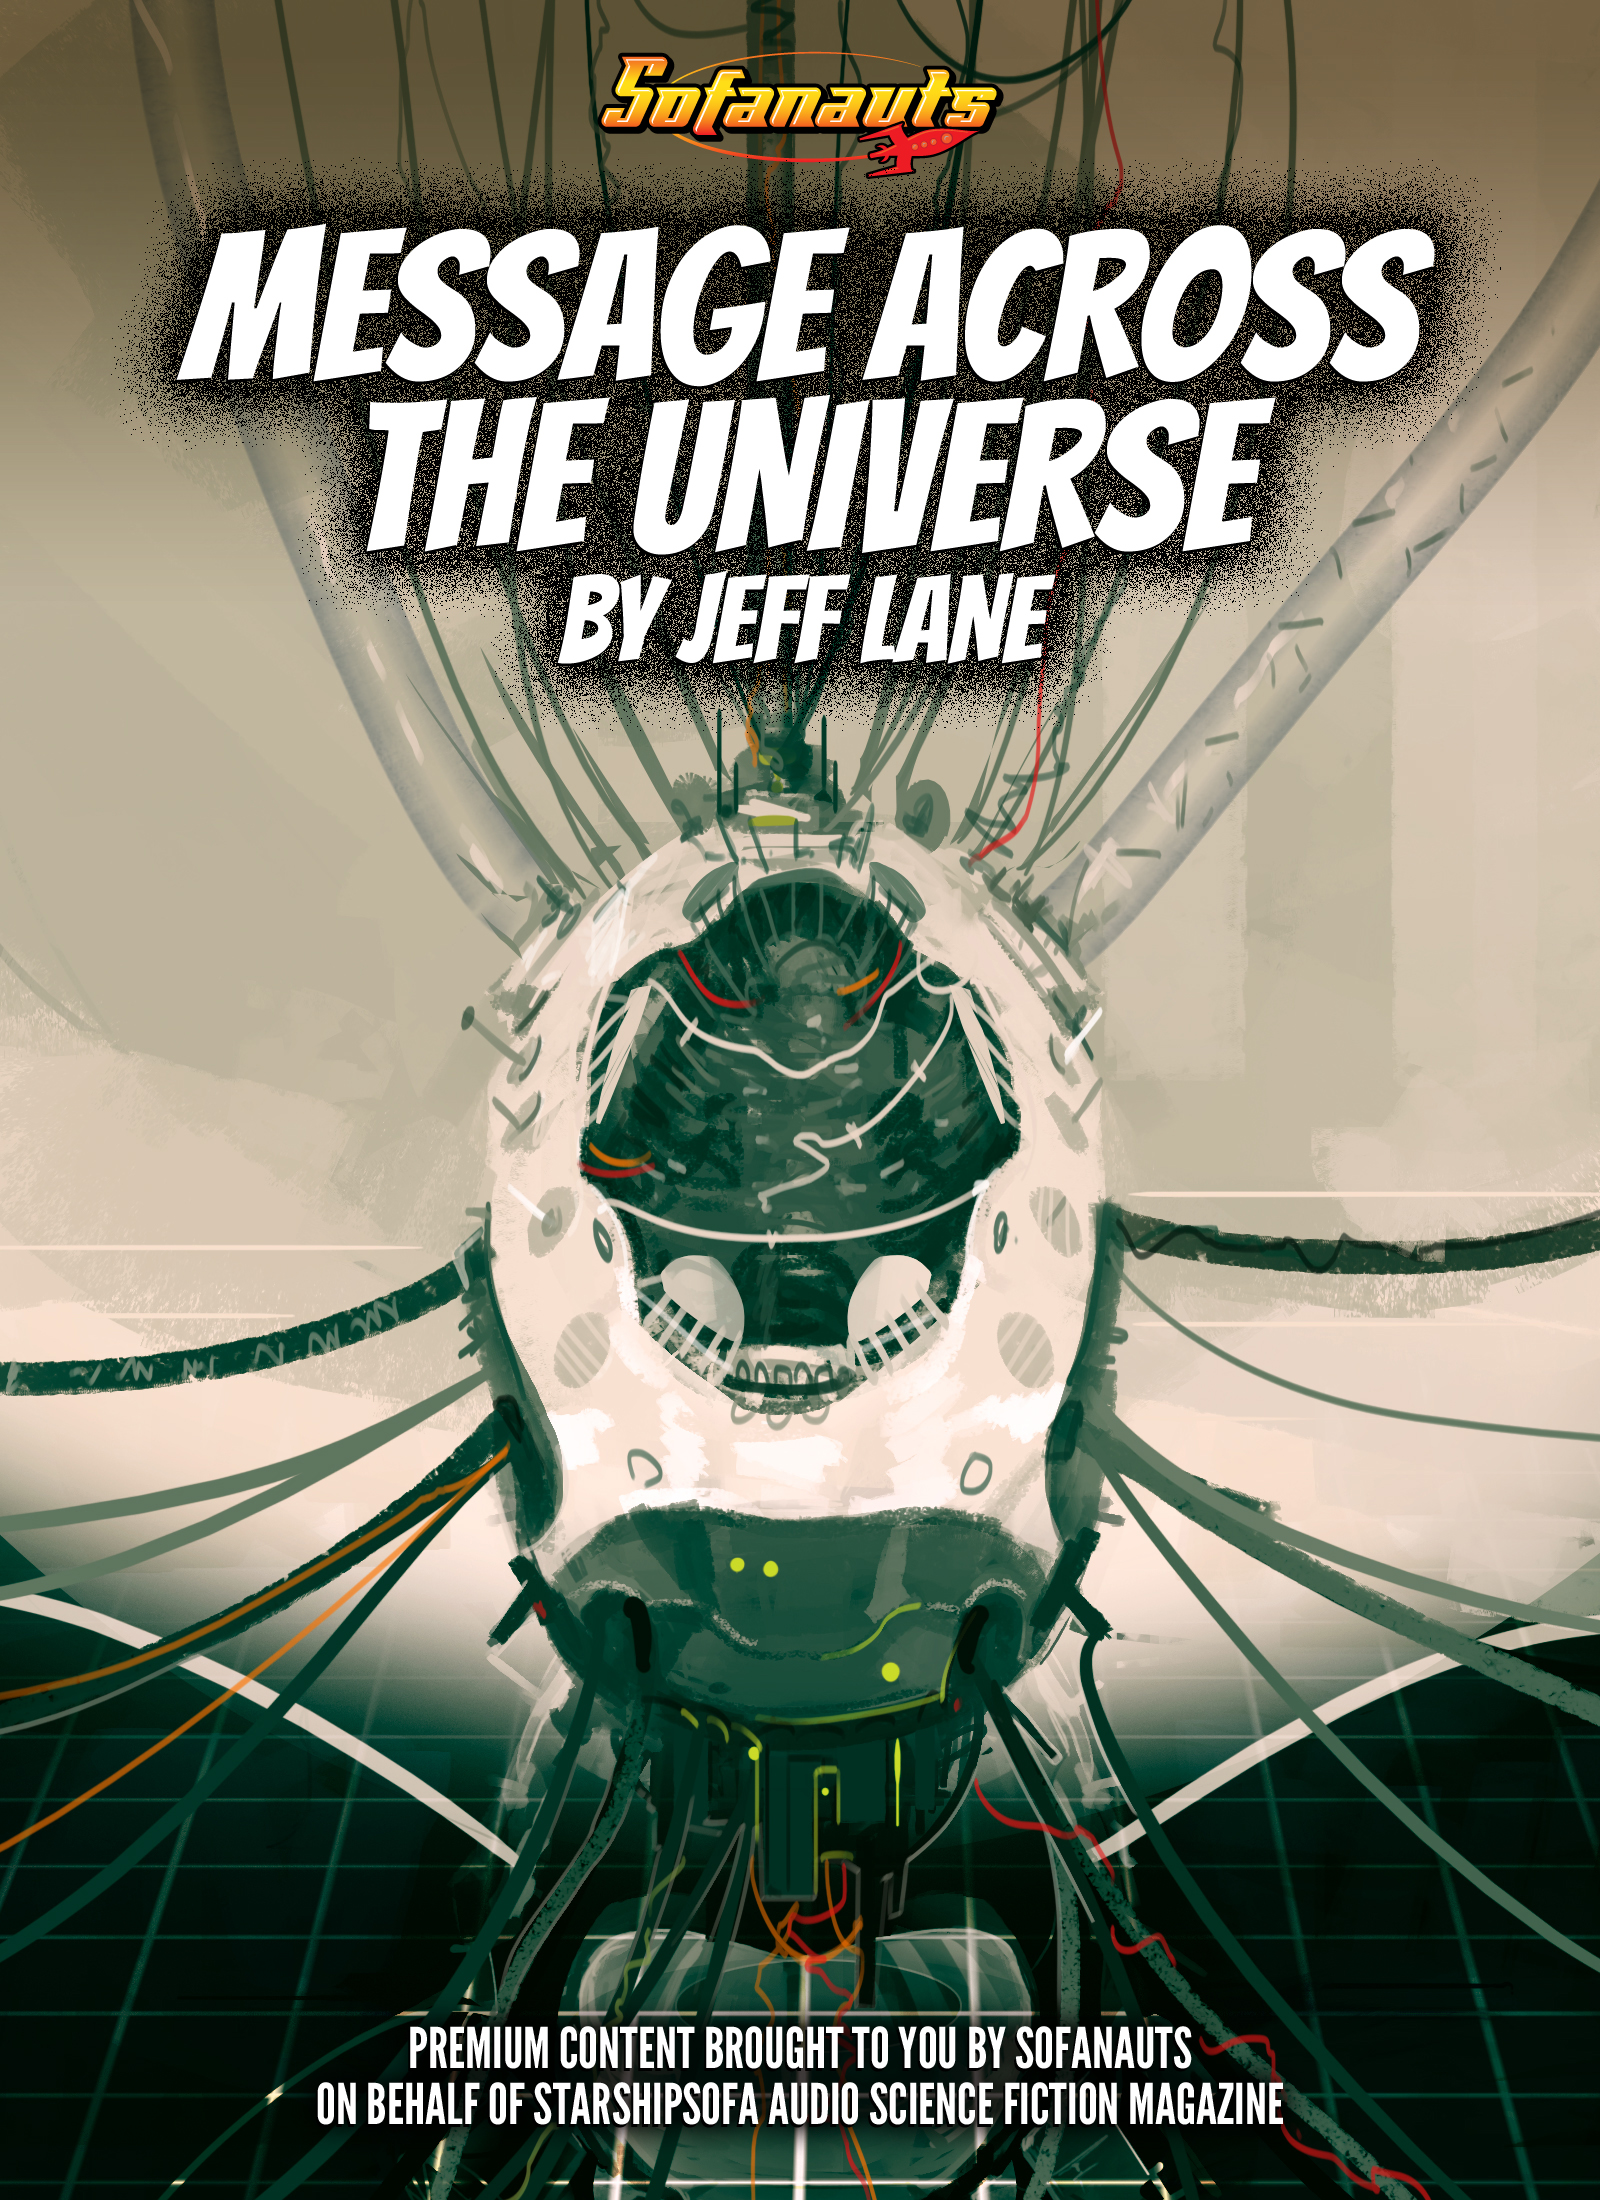 A message across the Universe, by Jeff Lane. Cover illustration by Scott Pellico